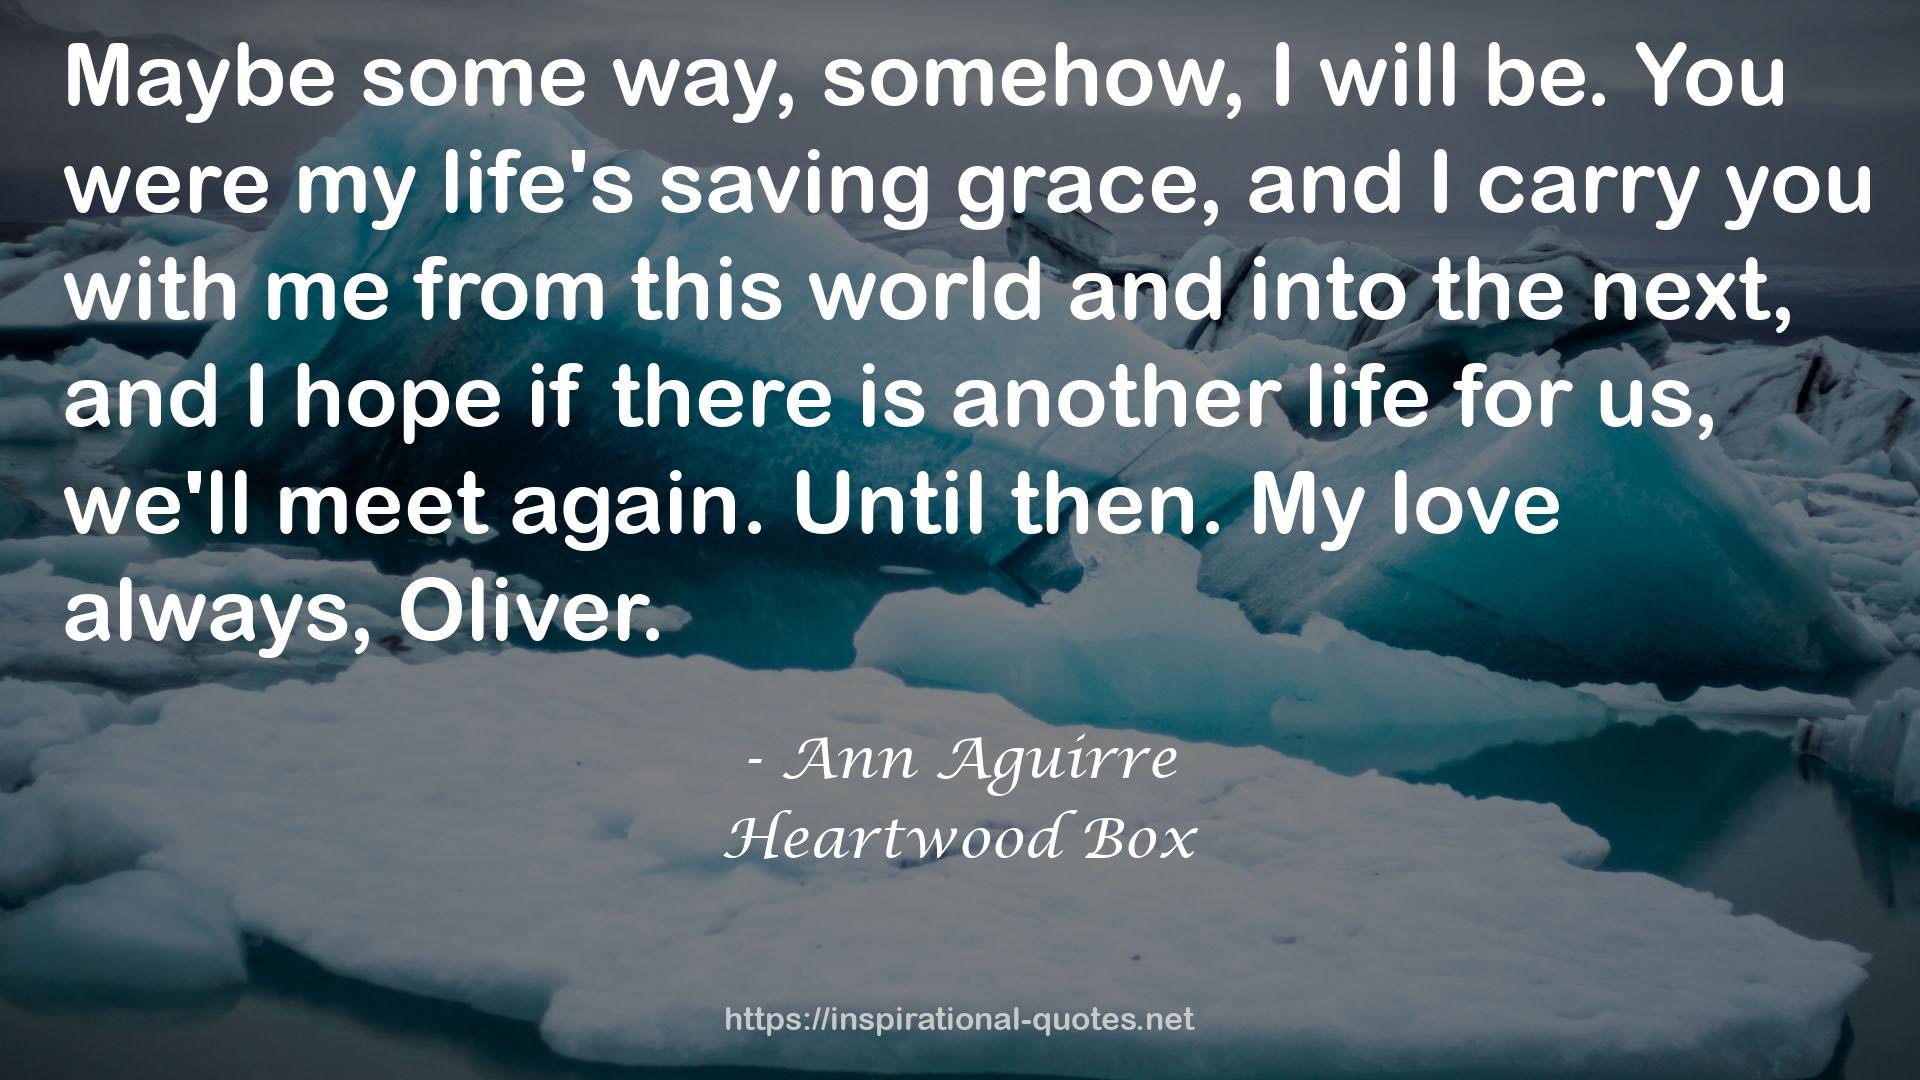 Heartwood Box QUOTES